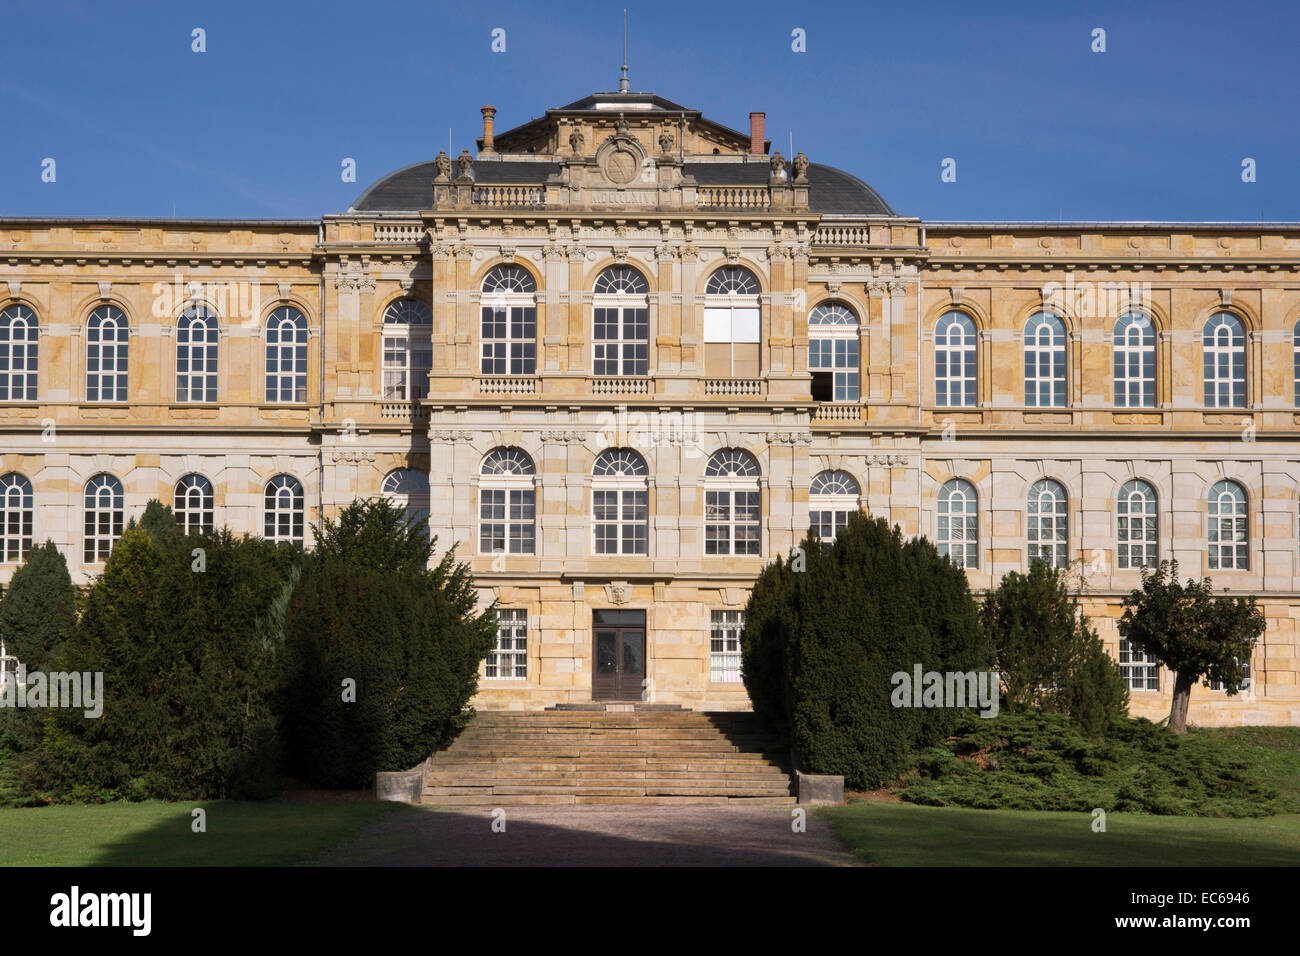 Ducal Museum, Schloss Friedenstein castle, Gotha, Thuringia, Germany, Europe Stock Photo